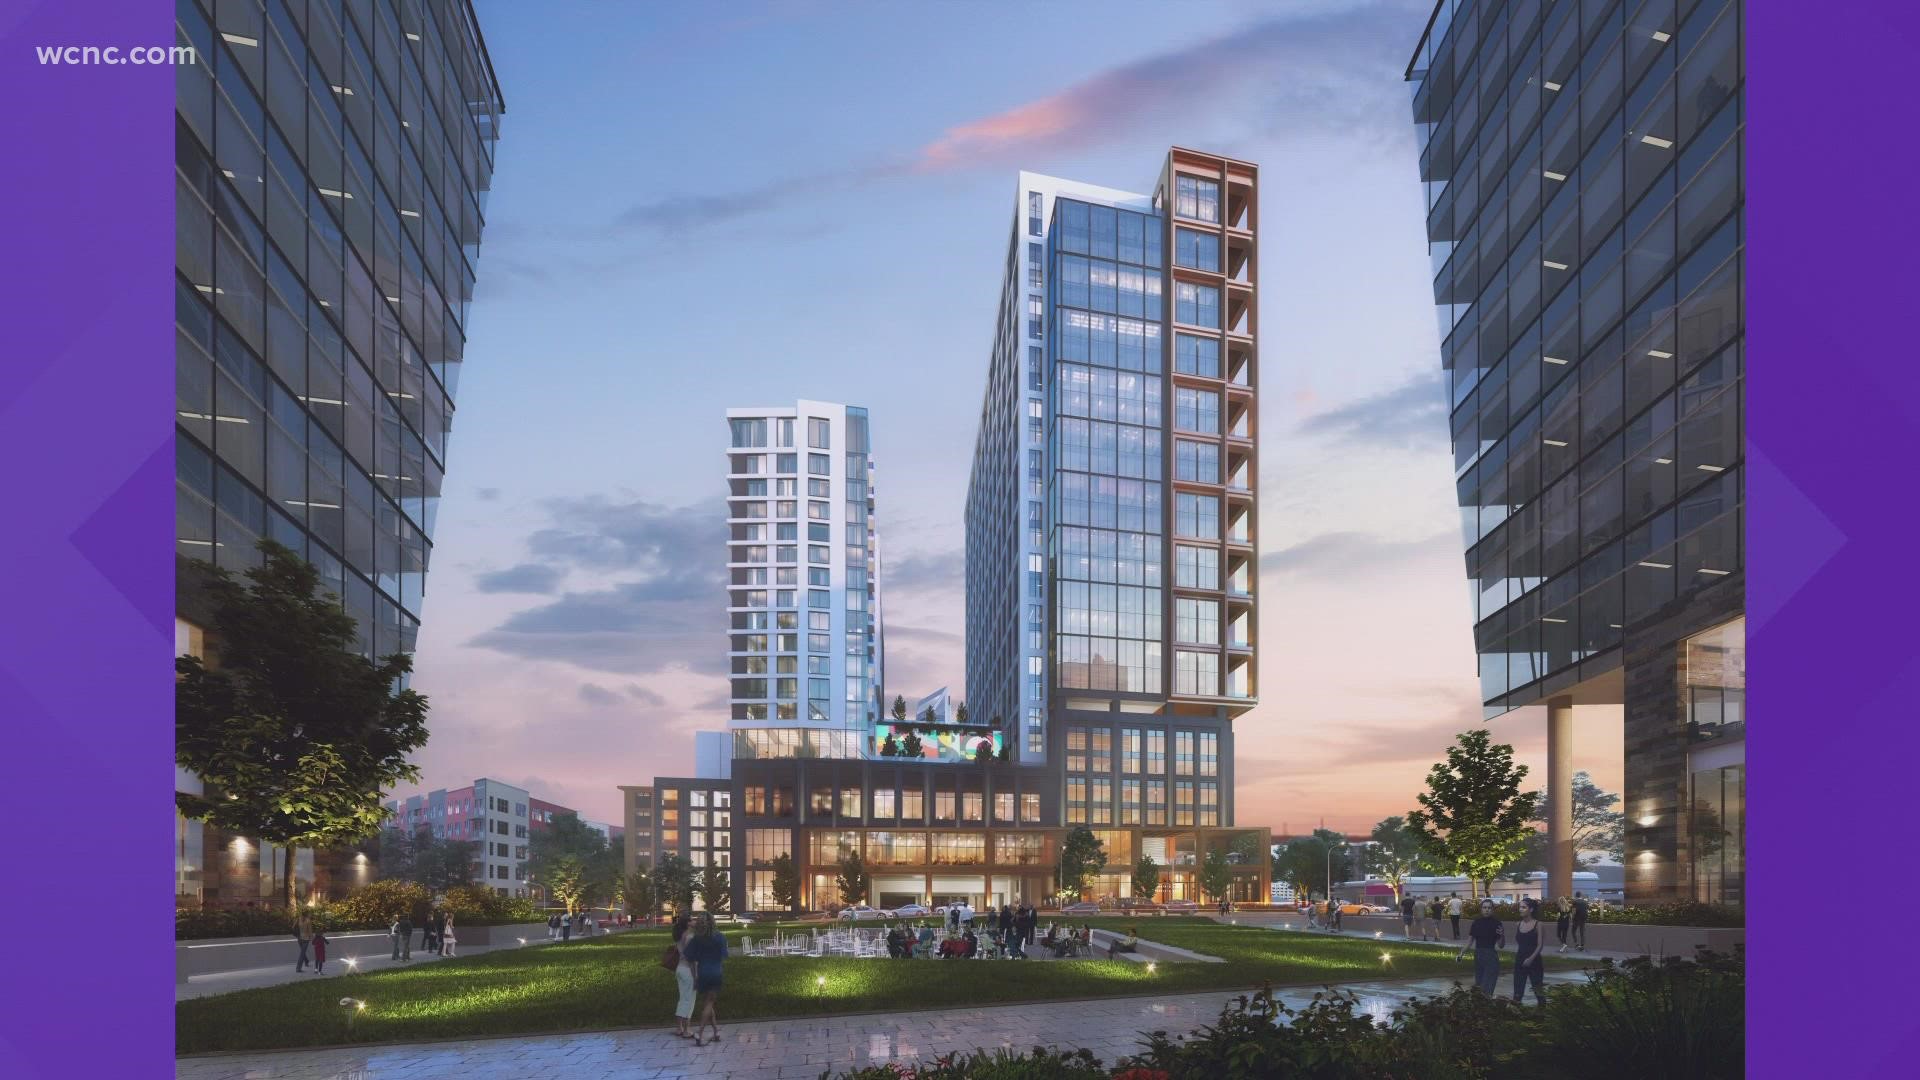 The new 31-story mixed-use building is coming to the intersection of South Tryon Street and Carson Boulevard.